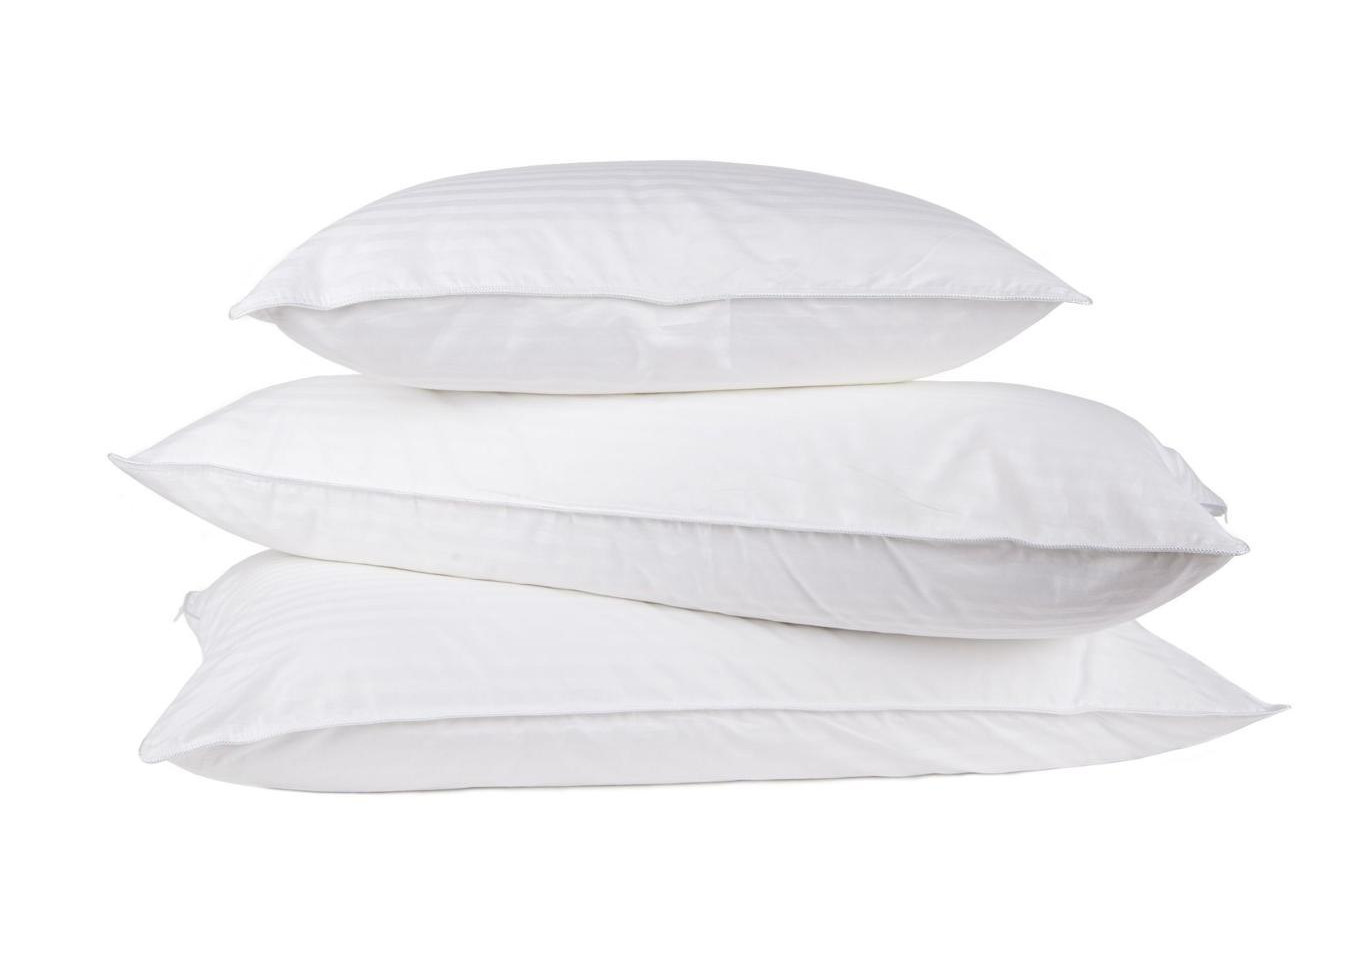 are the luxe pillows comfortable?